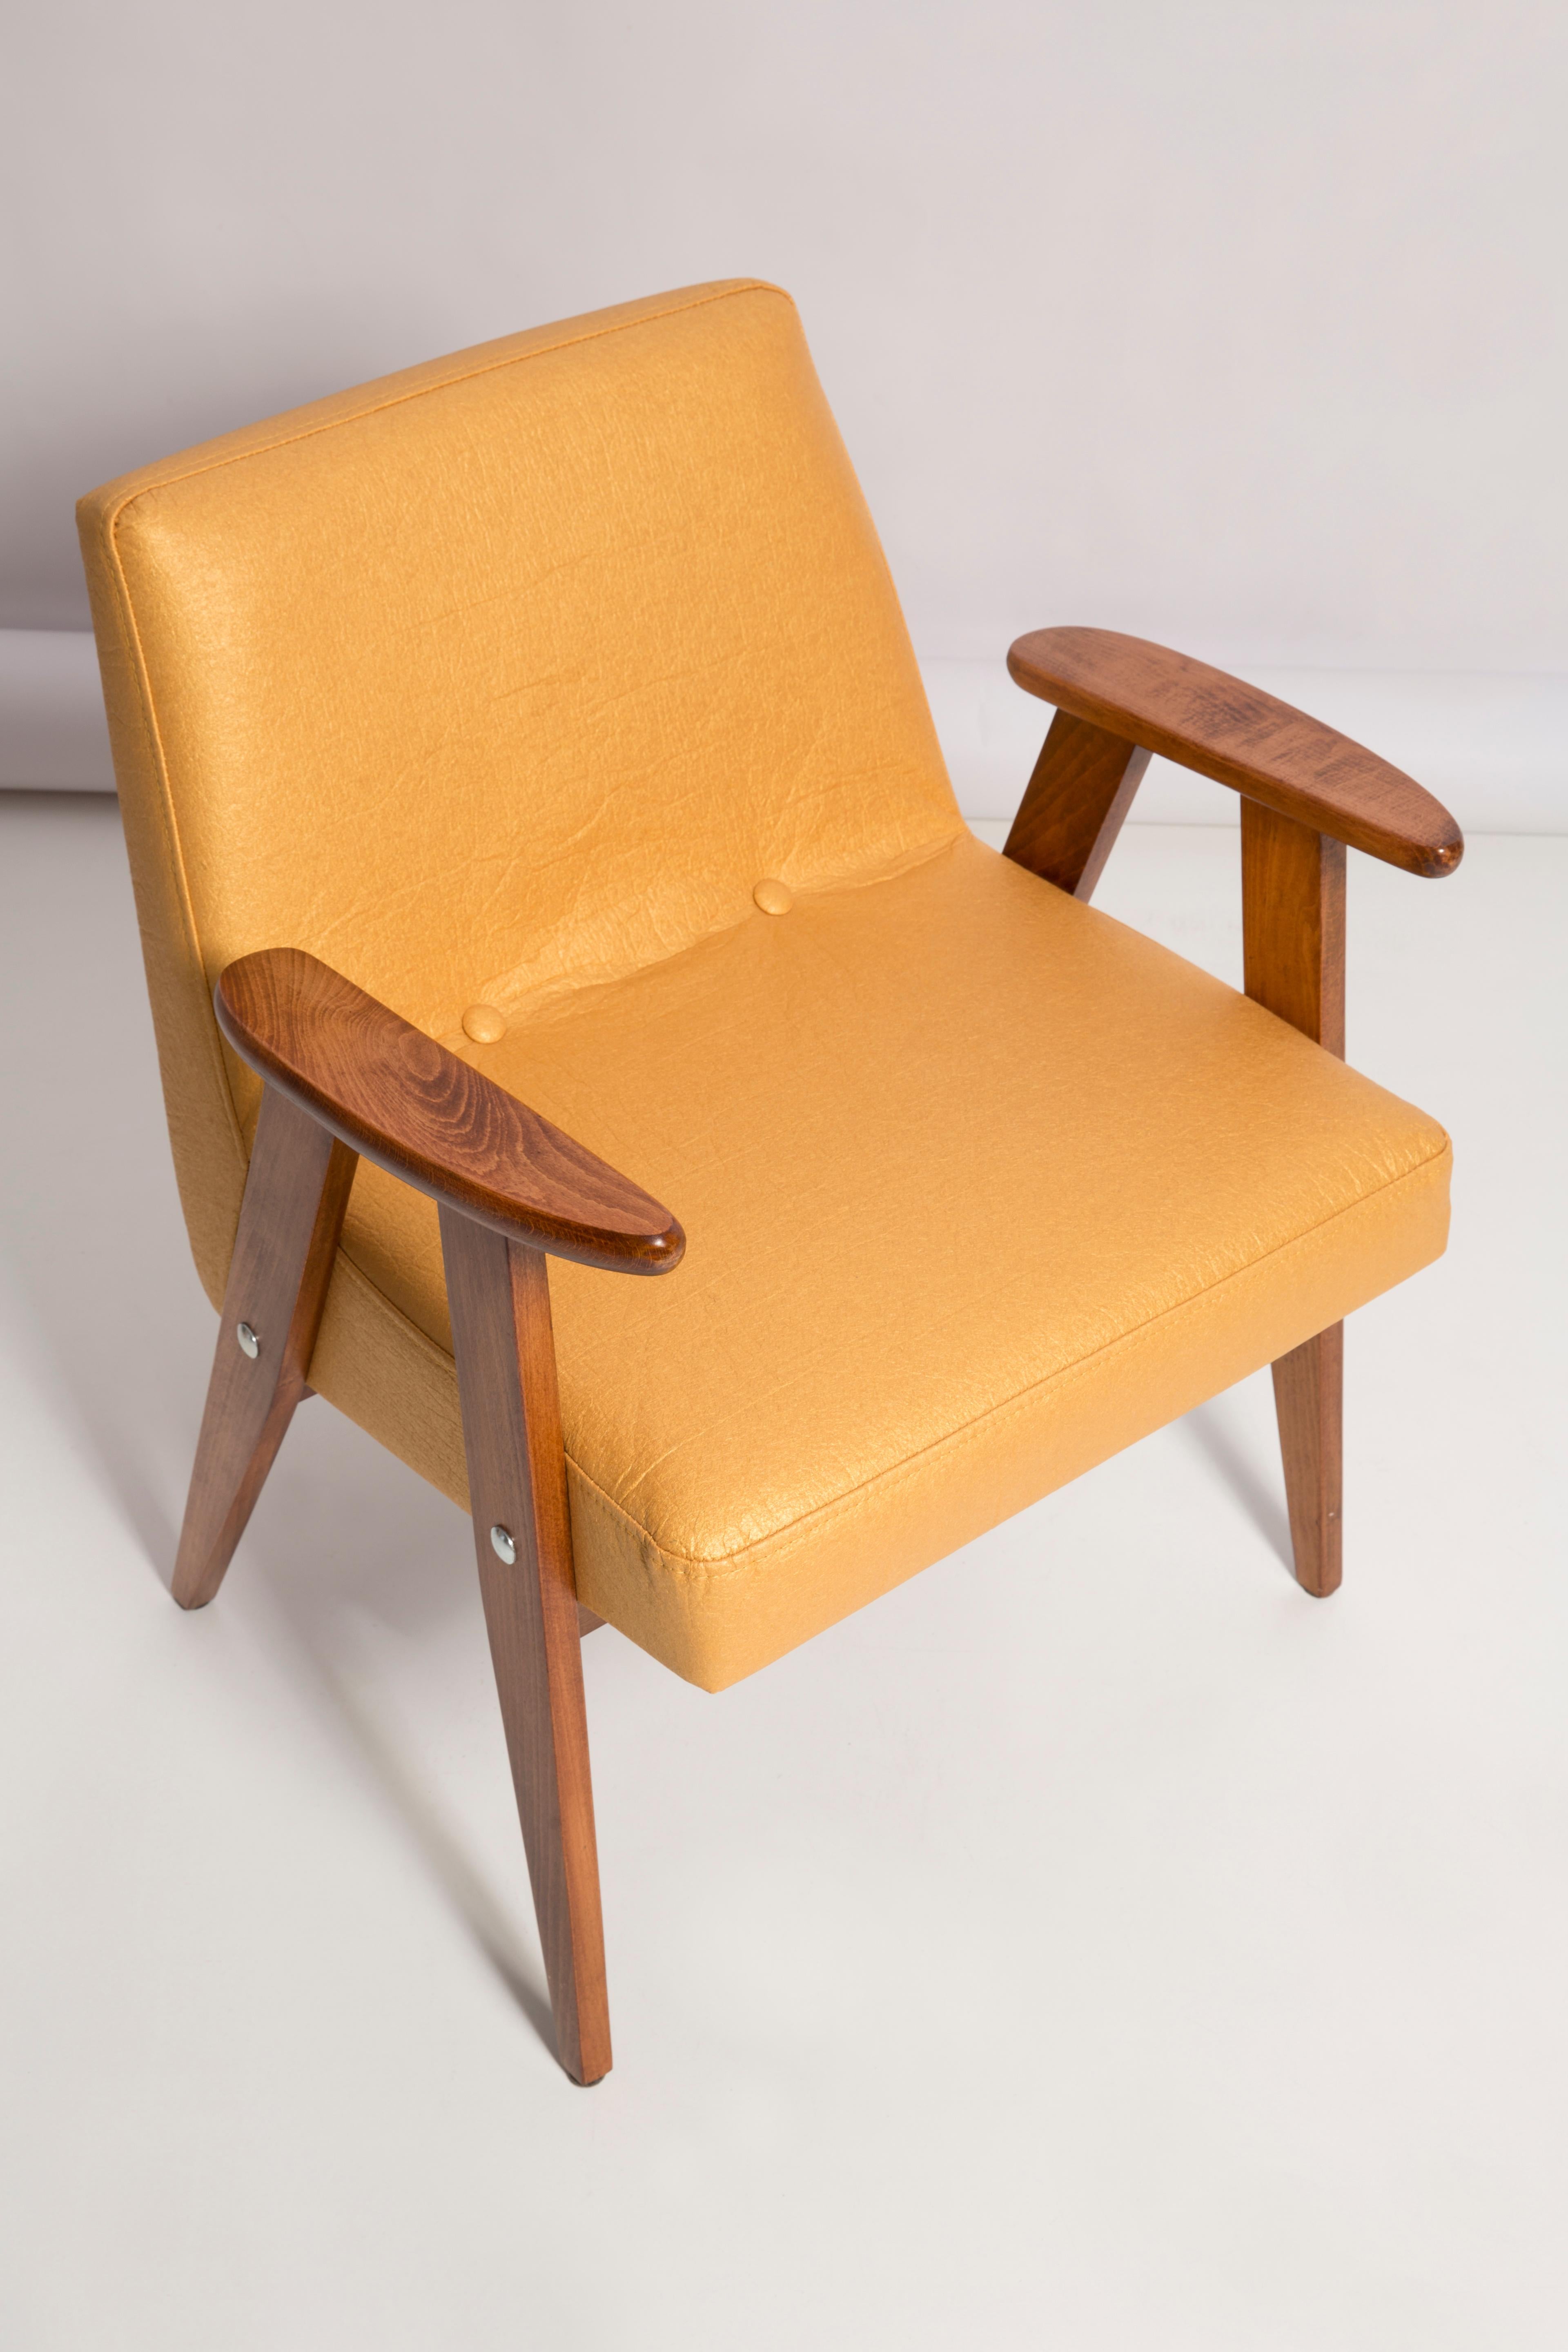 Polish Midcentury 366 Club Armchair in Gold Pineapple Leather, Jozef Chierowski, 1960s For Sale